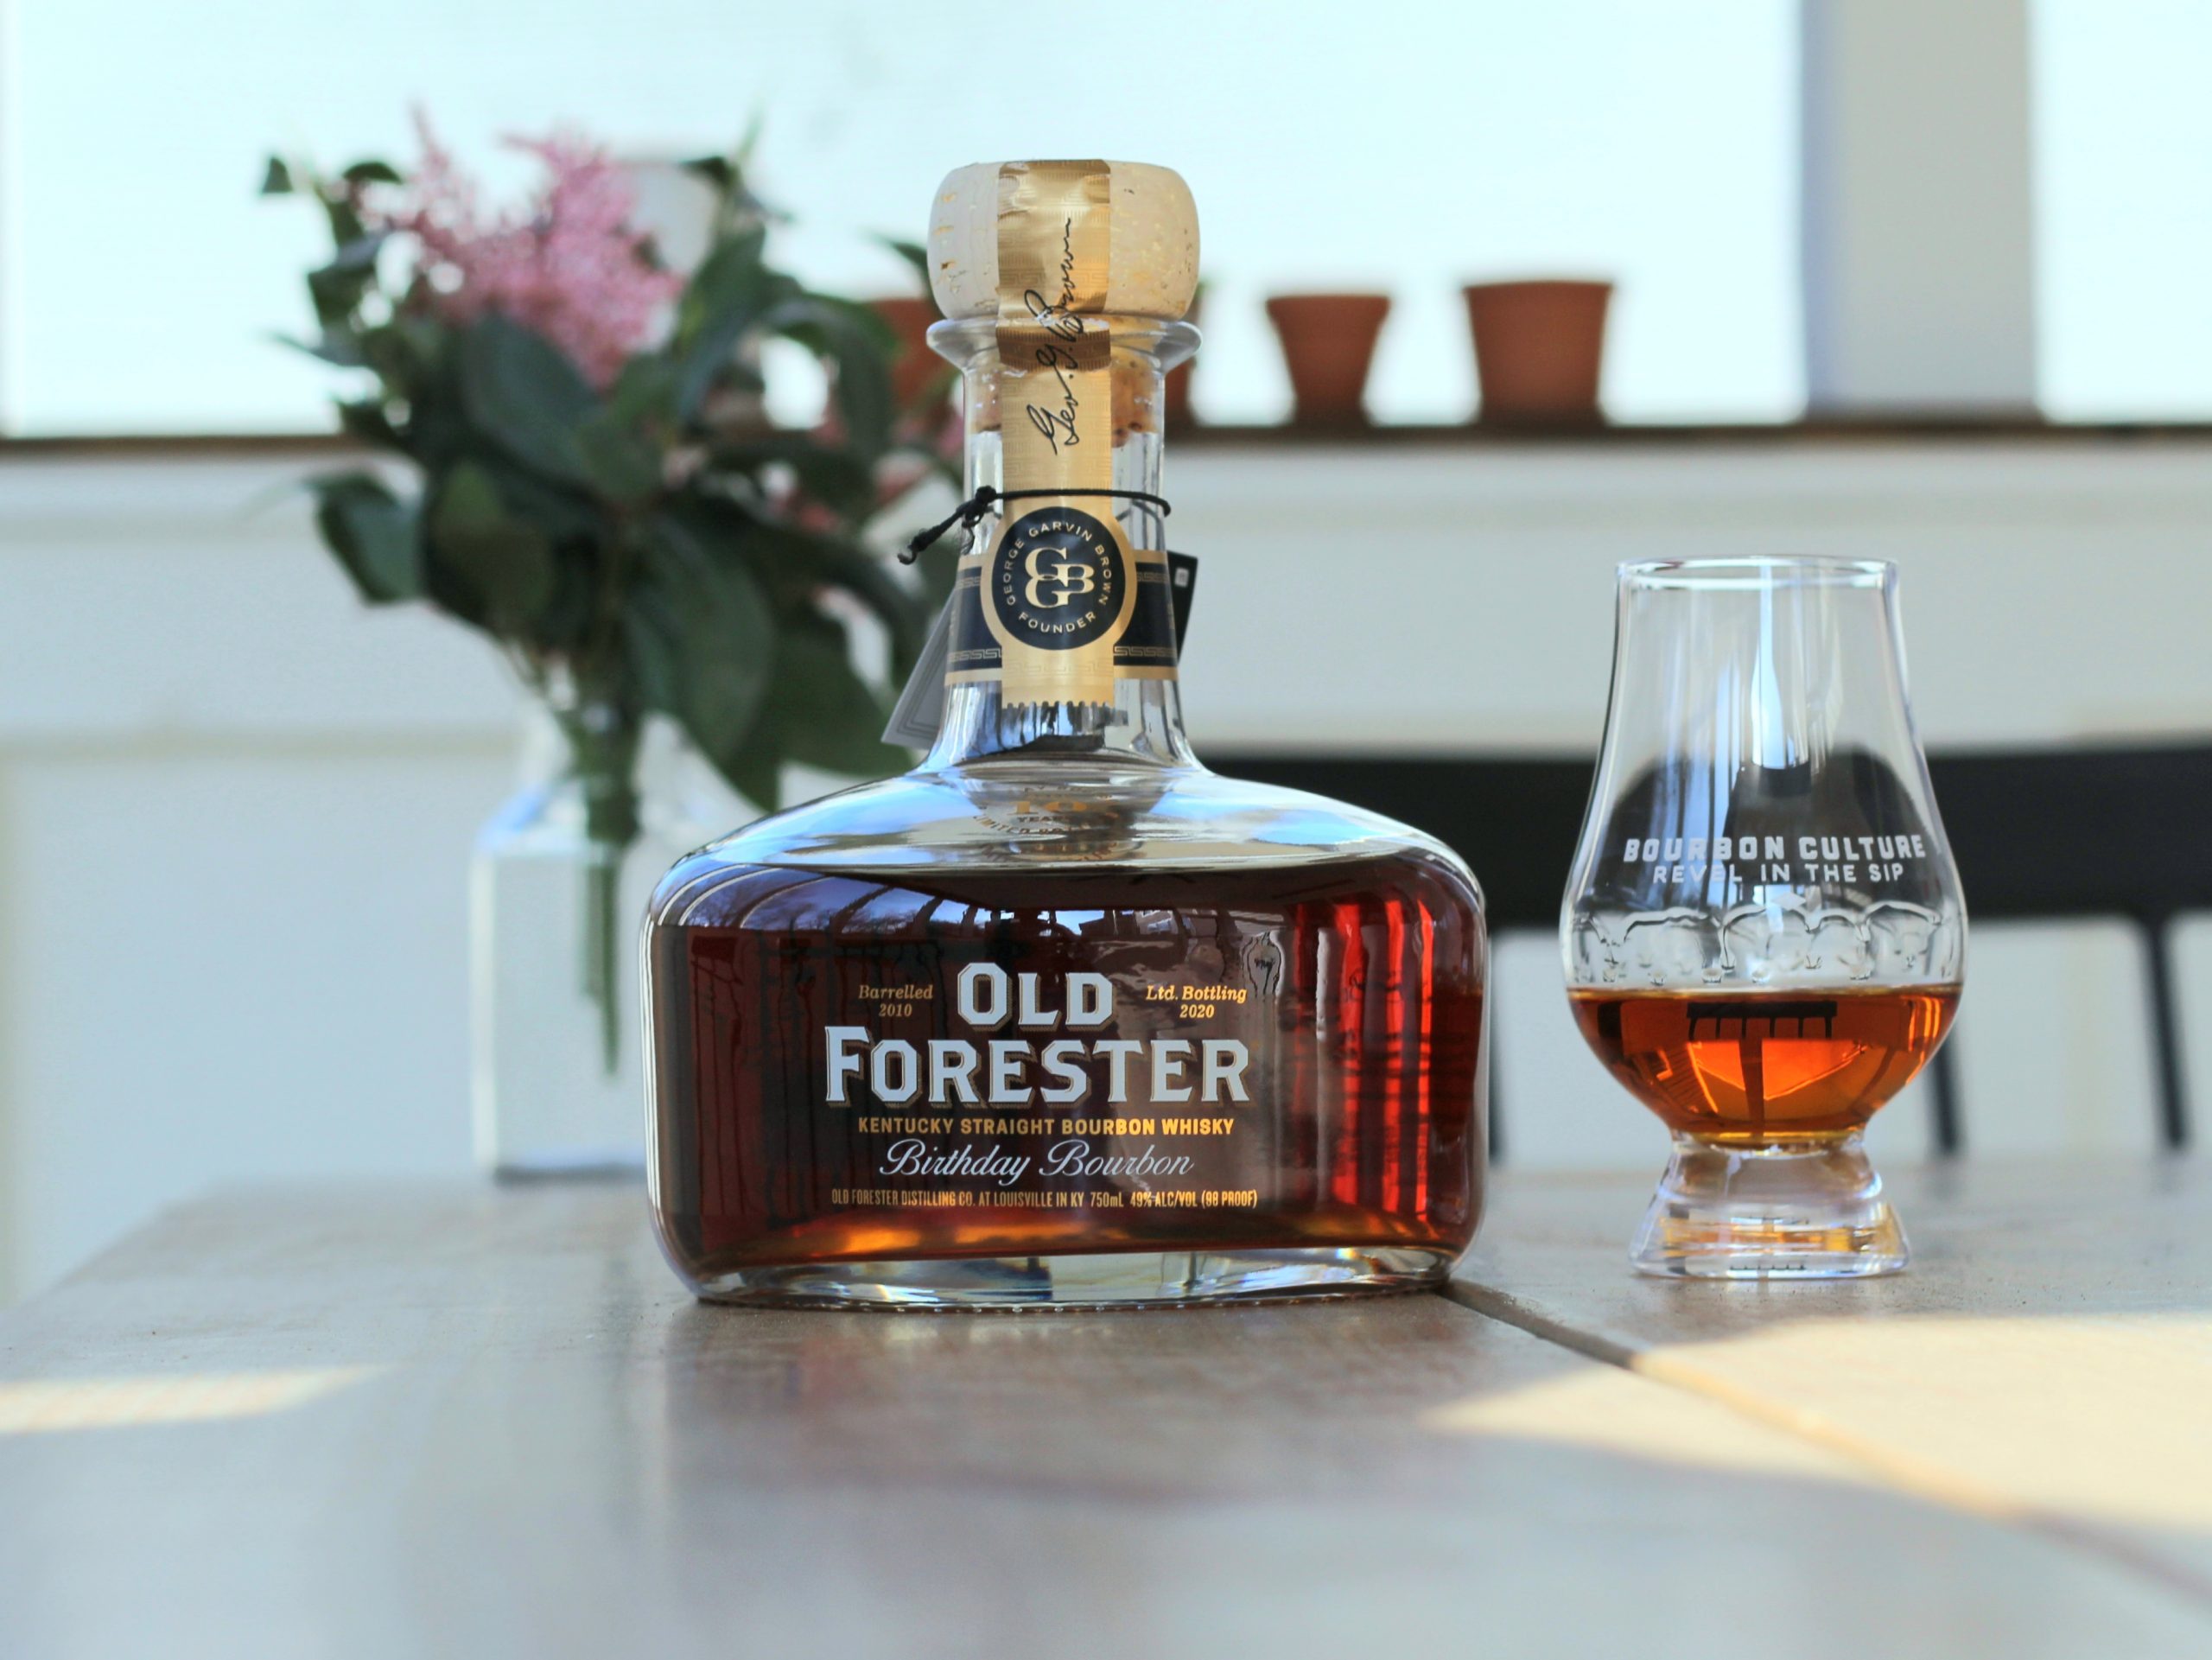 Old Forester Birthday Bourbon 2020 Review - Bourbon Culture